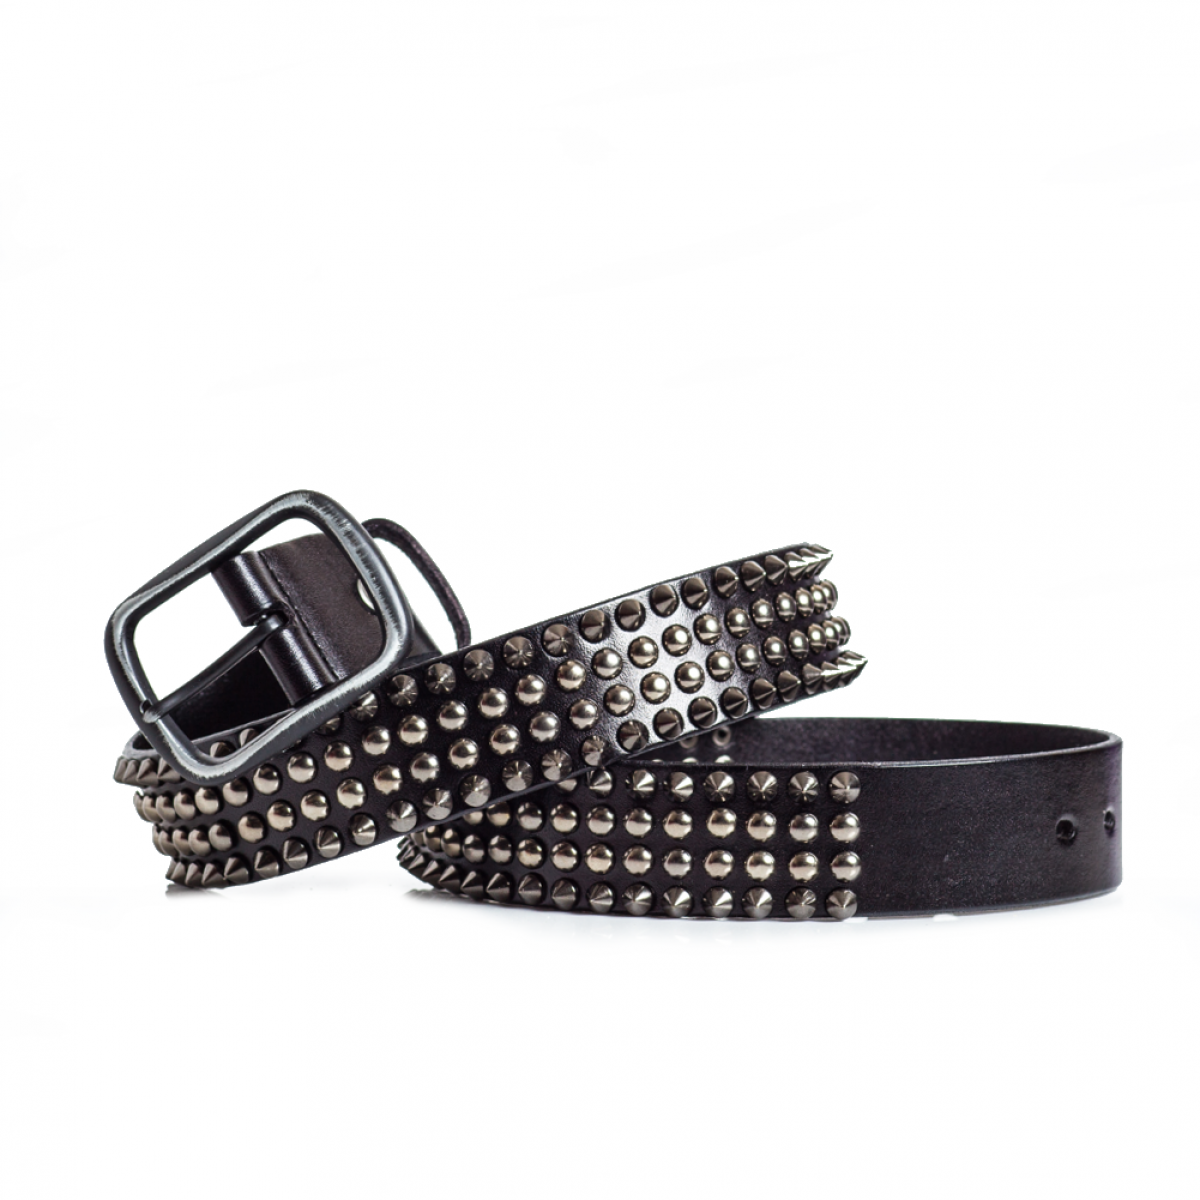 Spiked Leather Belt Black Sizes 30-44in | LATICCI